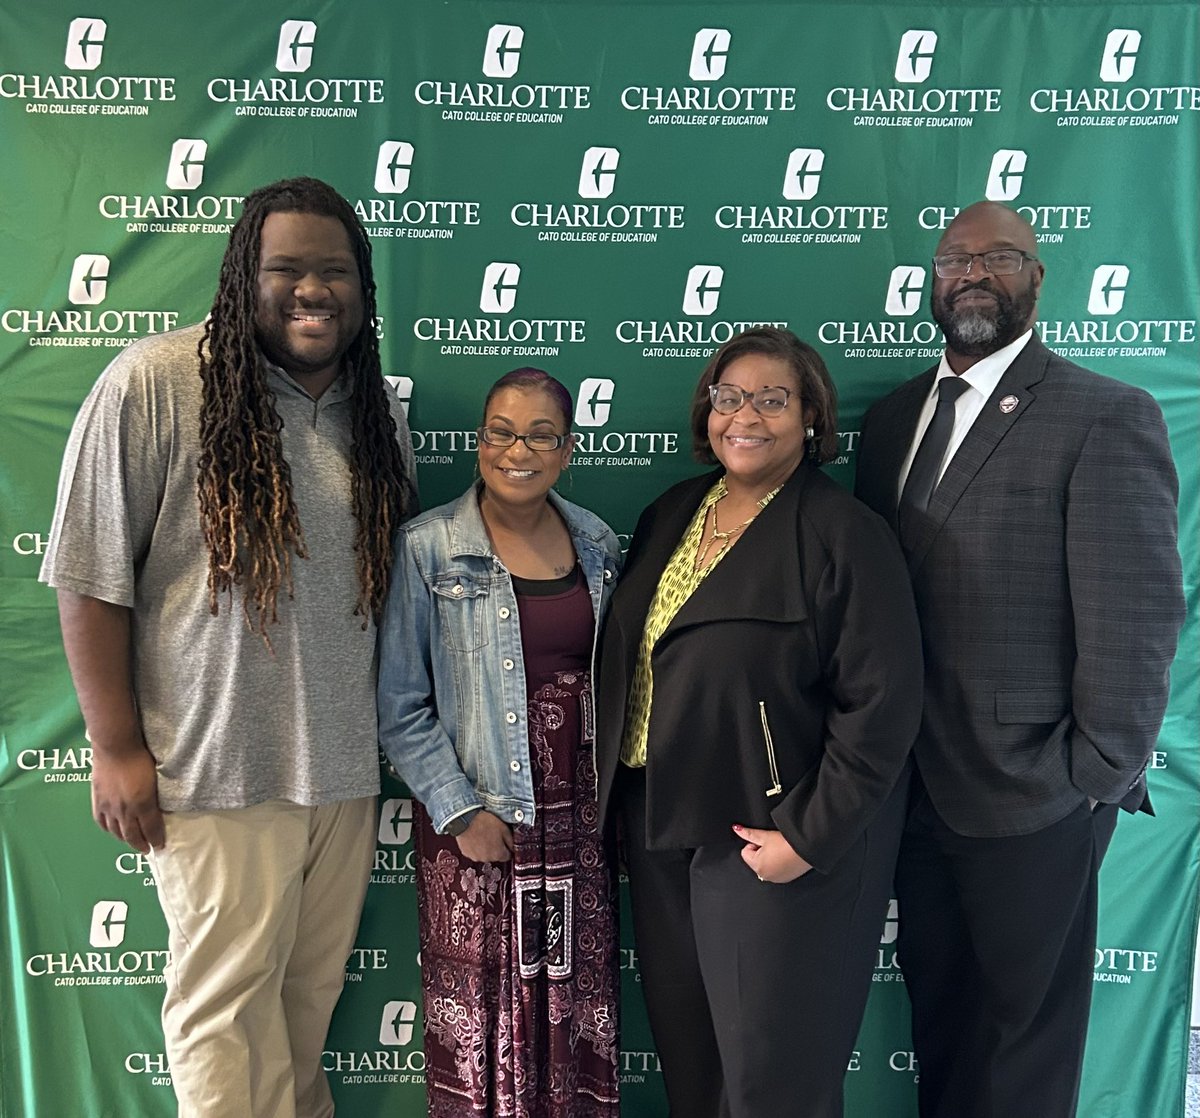 Thank you to our impactful speakers @CrimdocBrown @DrJWilliams4 and Dr. Thompson Marshall at our brown bag talk titled “Navigating Graduate School as a BIPOC Person” #beempowered